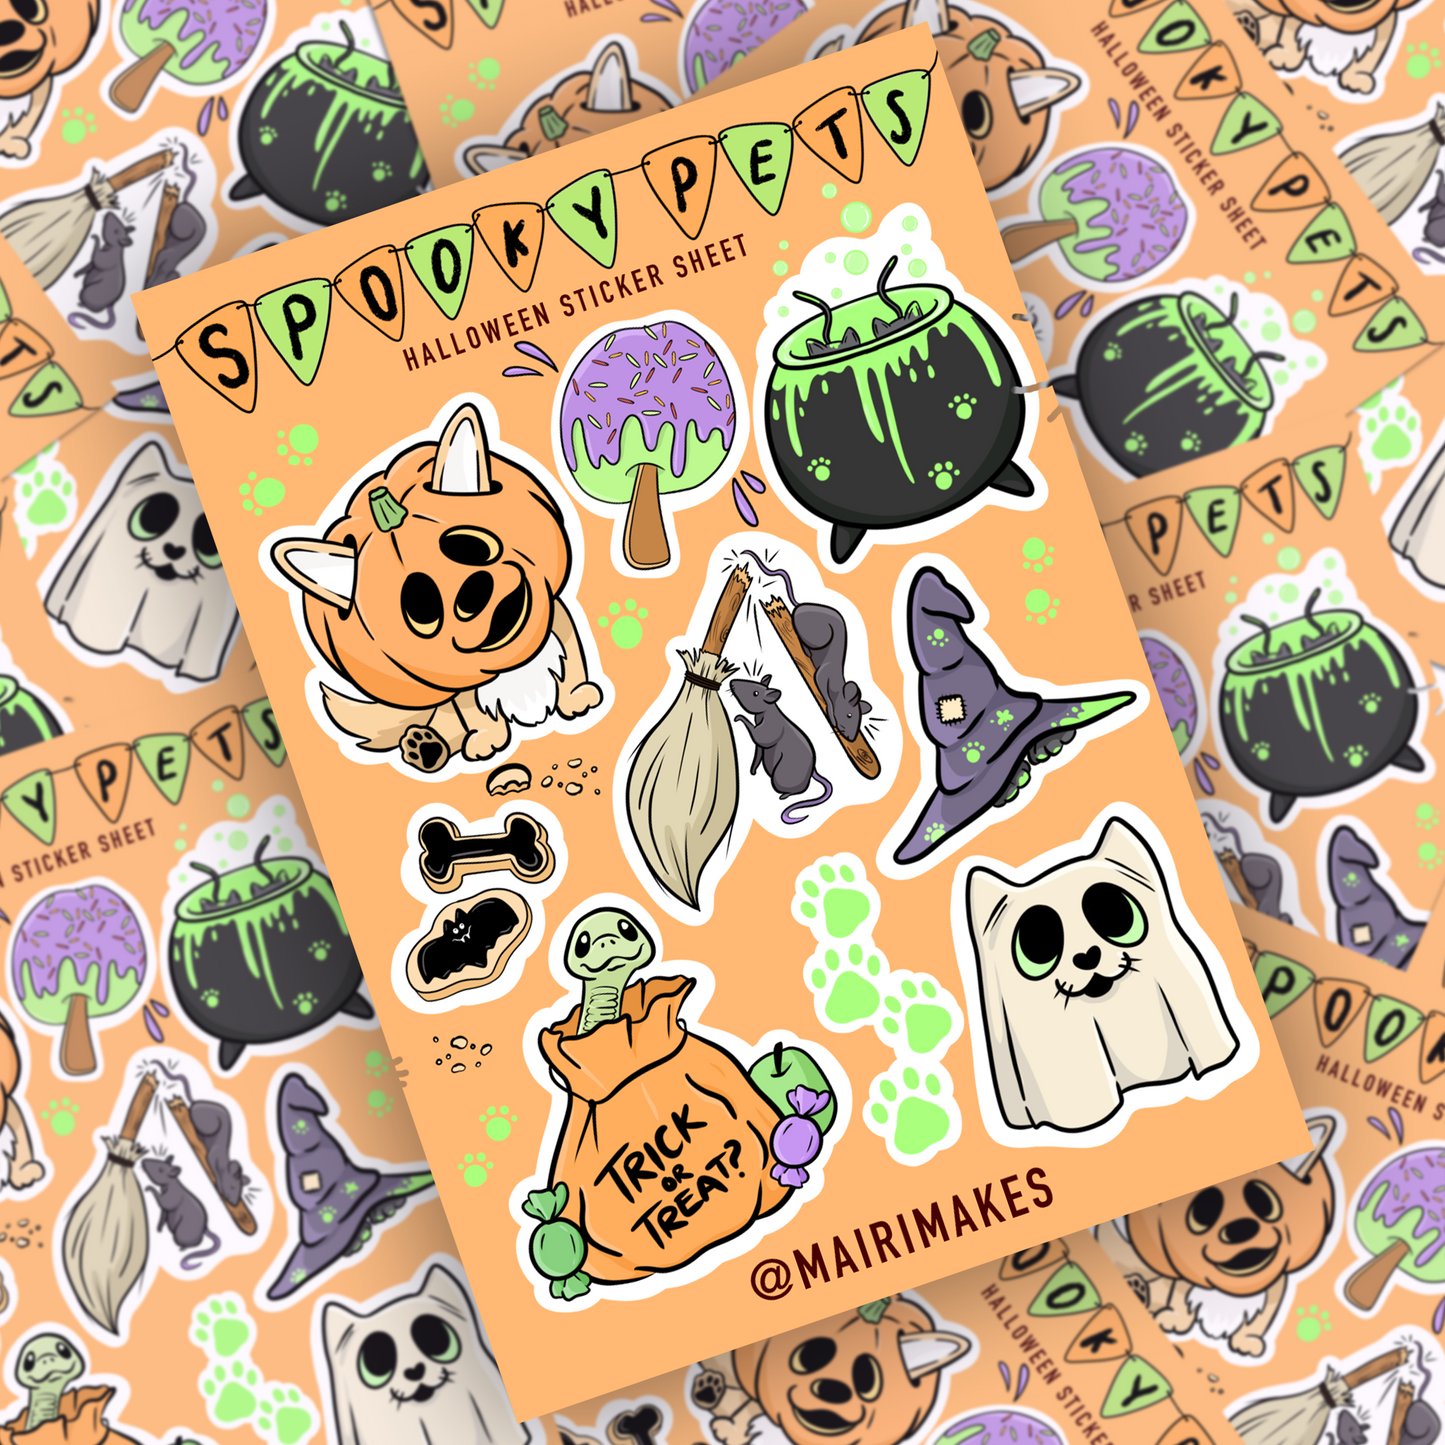 Halloween Mystery Bundle - Prints, Stickers and Pin Badges